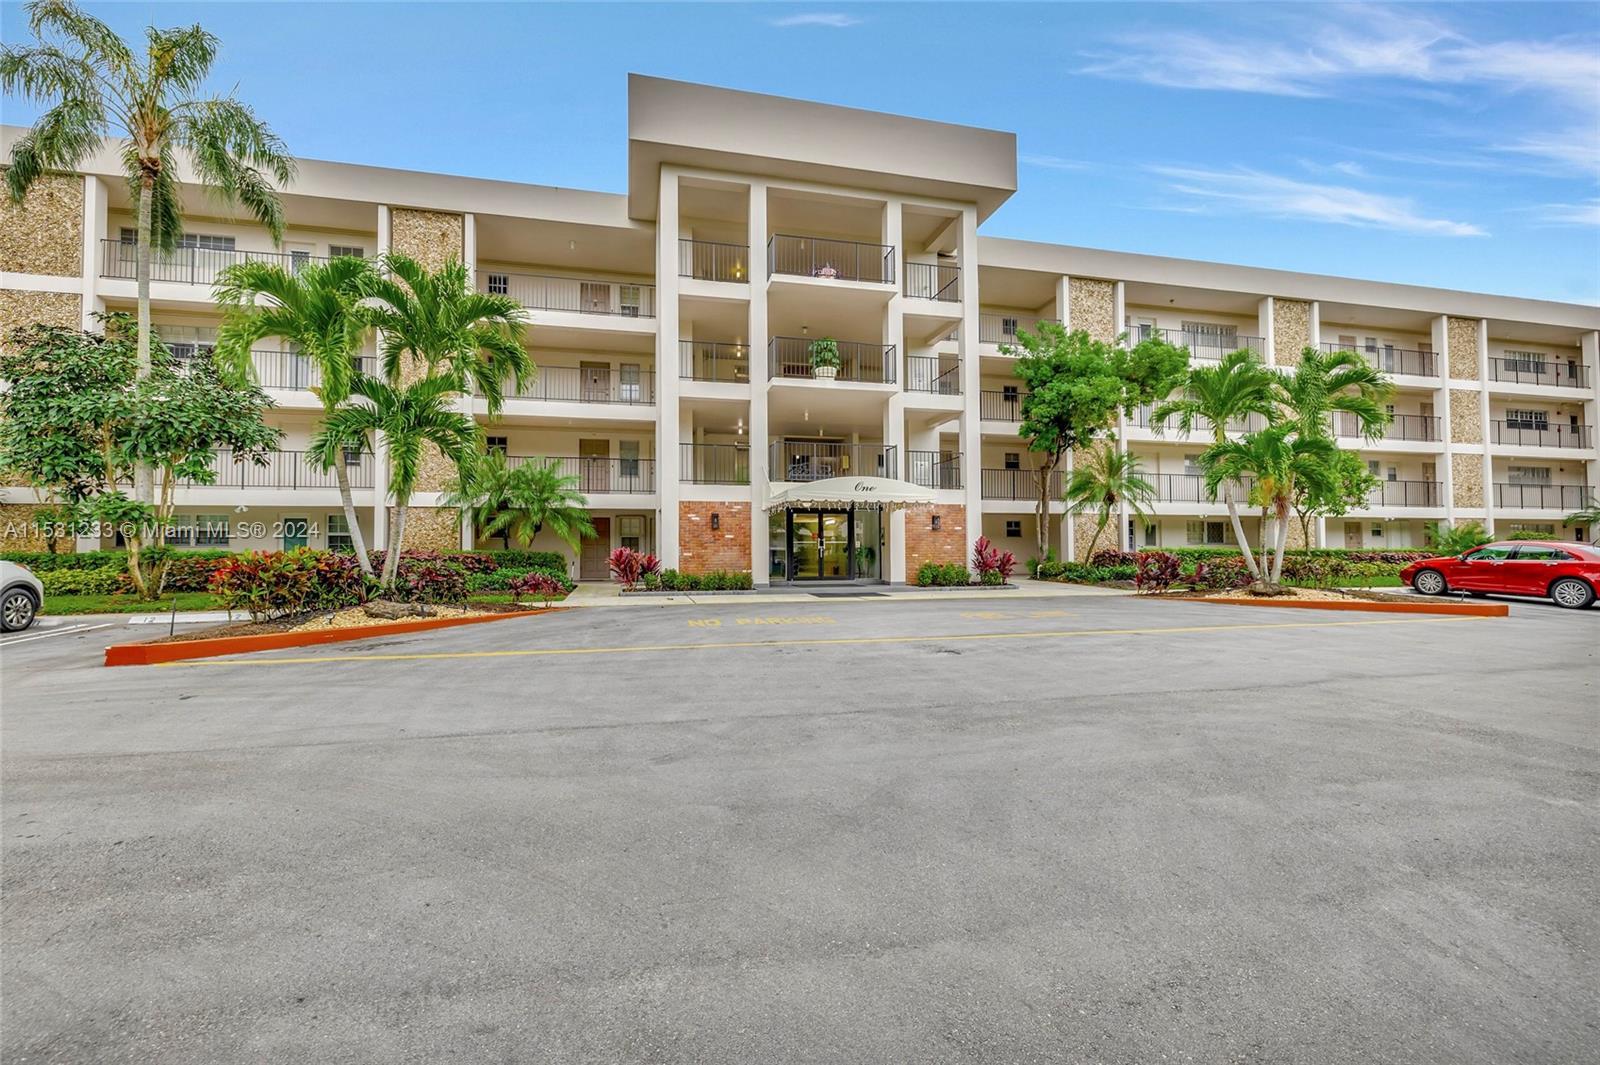 Photo of 2800 N Palm Aire Dr #310 in Pompano Beach, FL